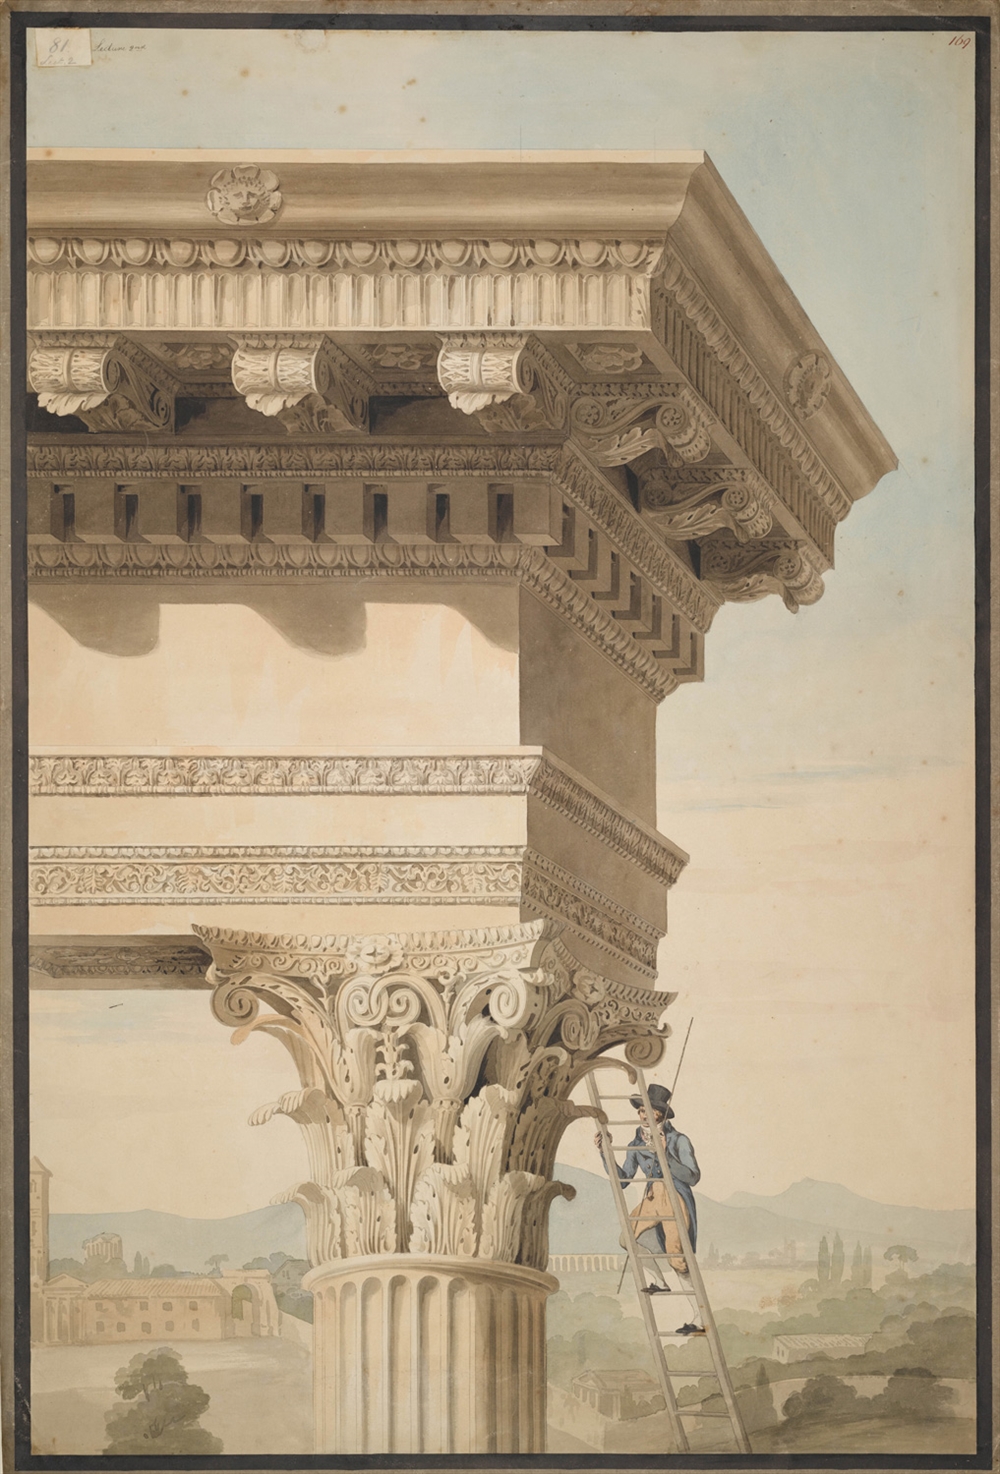 Archisearch - John Soane, Drawing showing a Student measuring a Capital of the Temple of Jupiter Stator (Castor and Pollux), Rome, Pencil, pen and watercolour, 1010 x 730 mm, 23/9/3